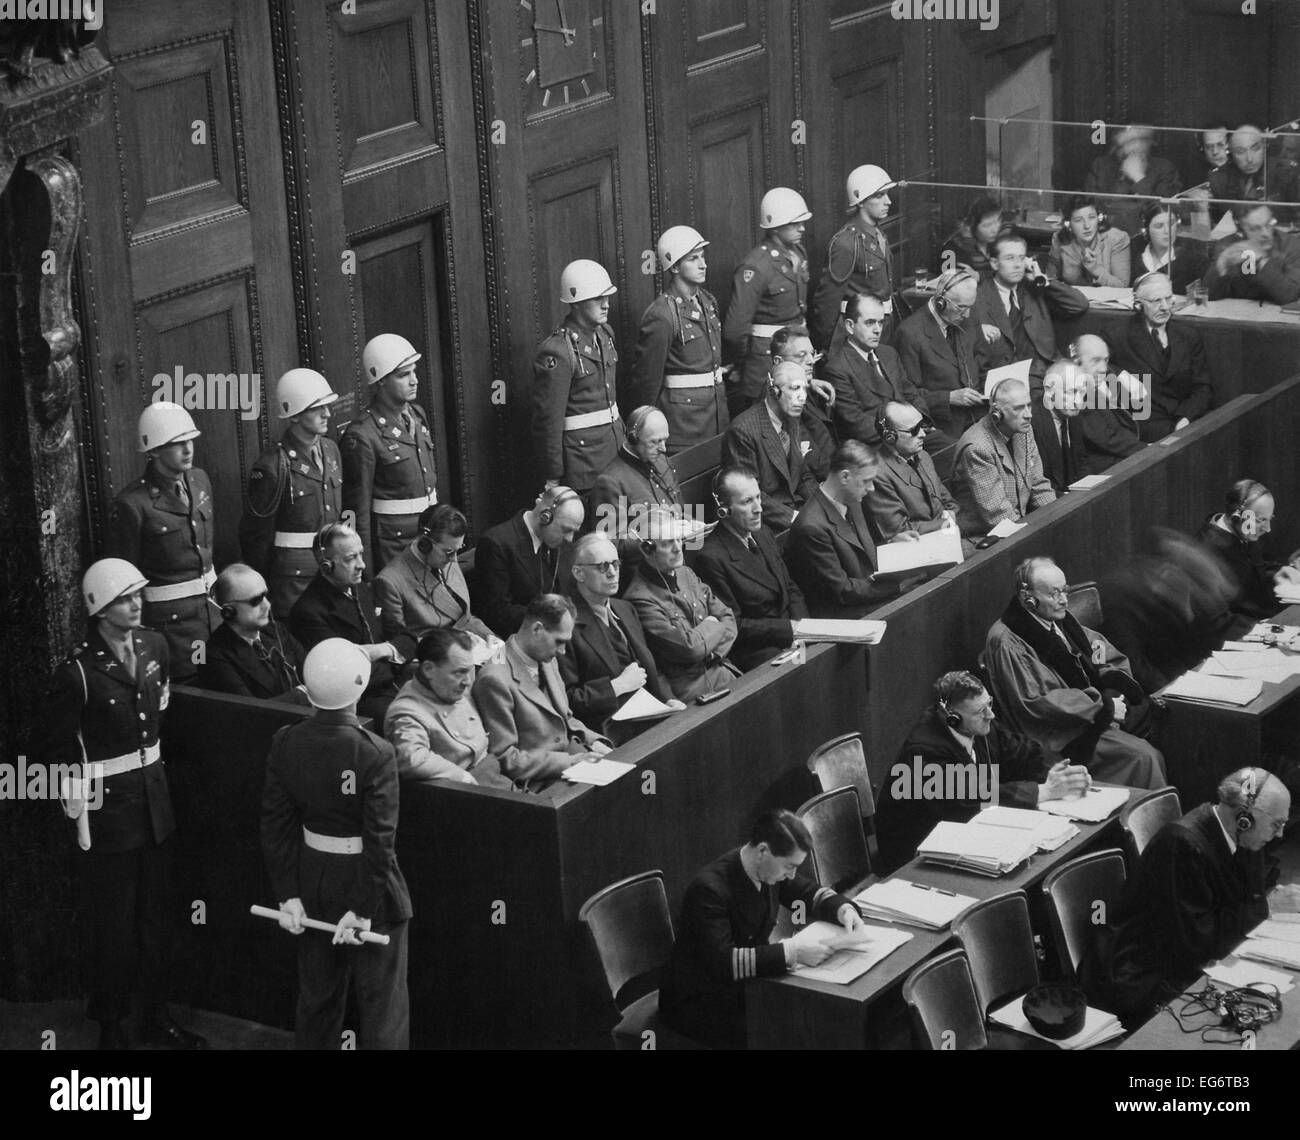 Former Nazi Germany's military and political leaders on trial at Nuremberg. They were prosecuted for waging aggressive war and Stock Photo